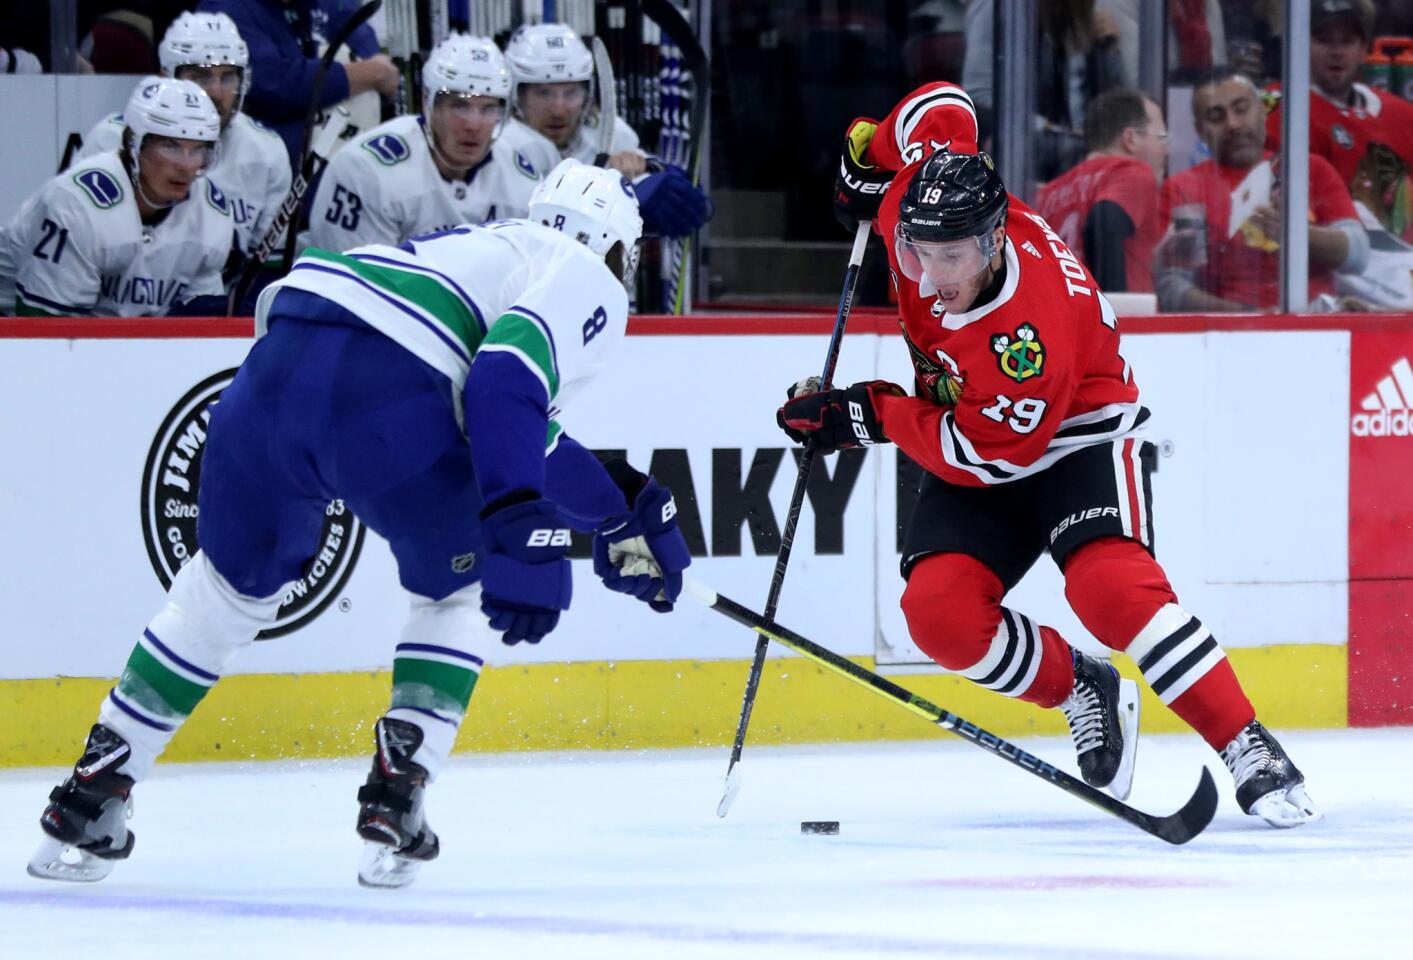 Blackhawks center Jonathan Toews (19) makes a move on Canucks defenseman Christopher Tanev (8) in the first period at the United Center on Thursday, February 7, 2019.